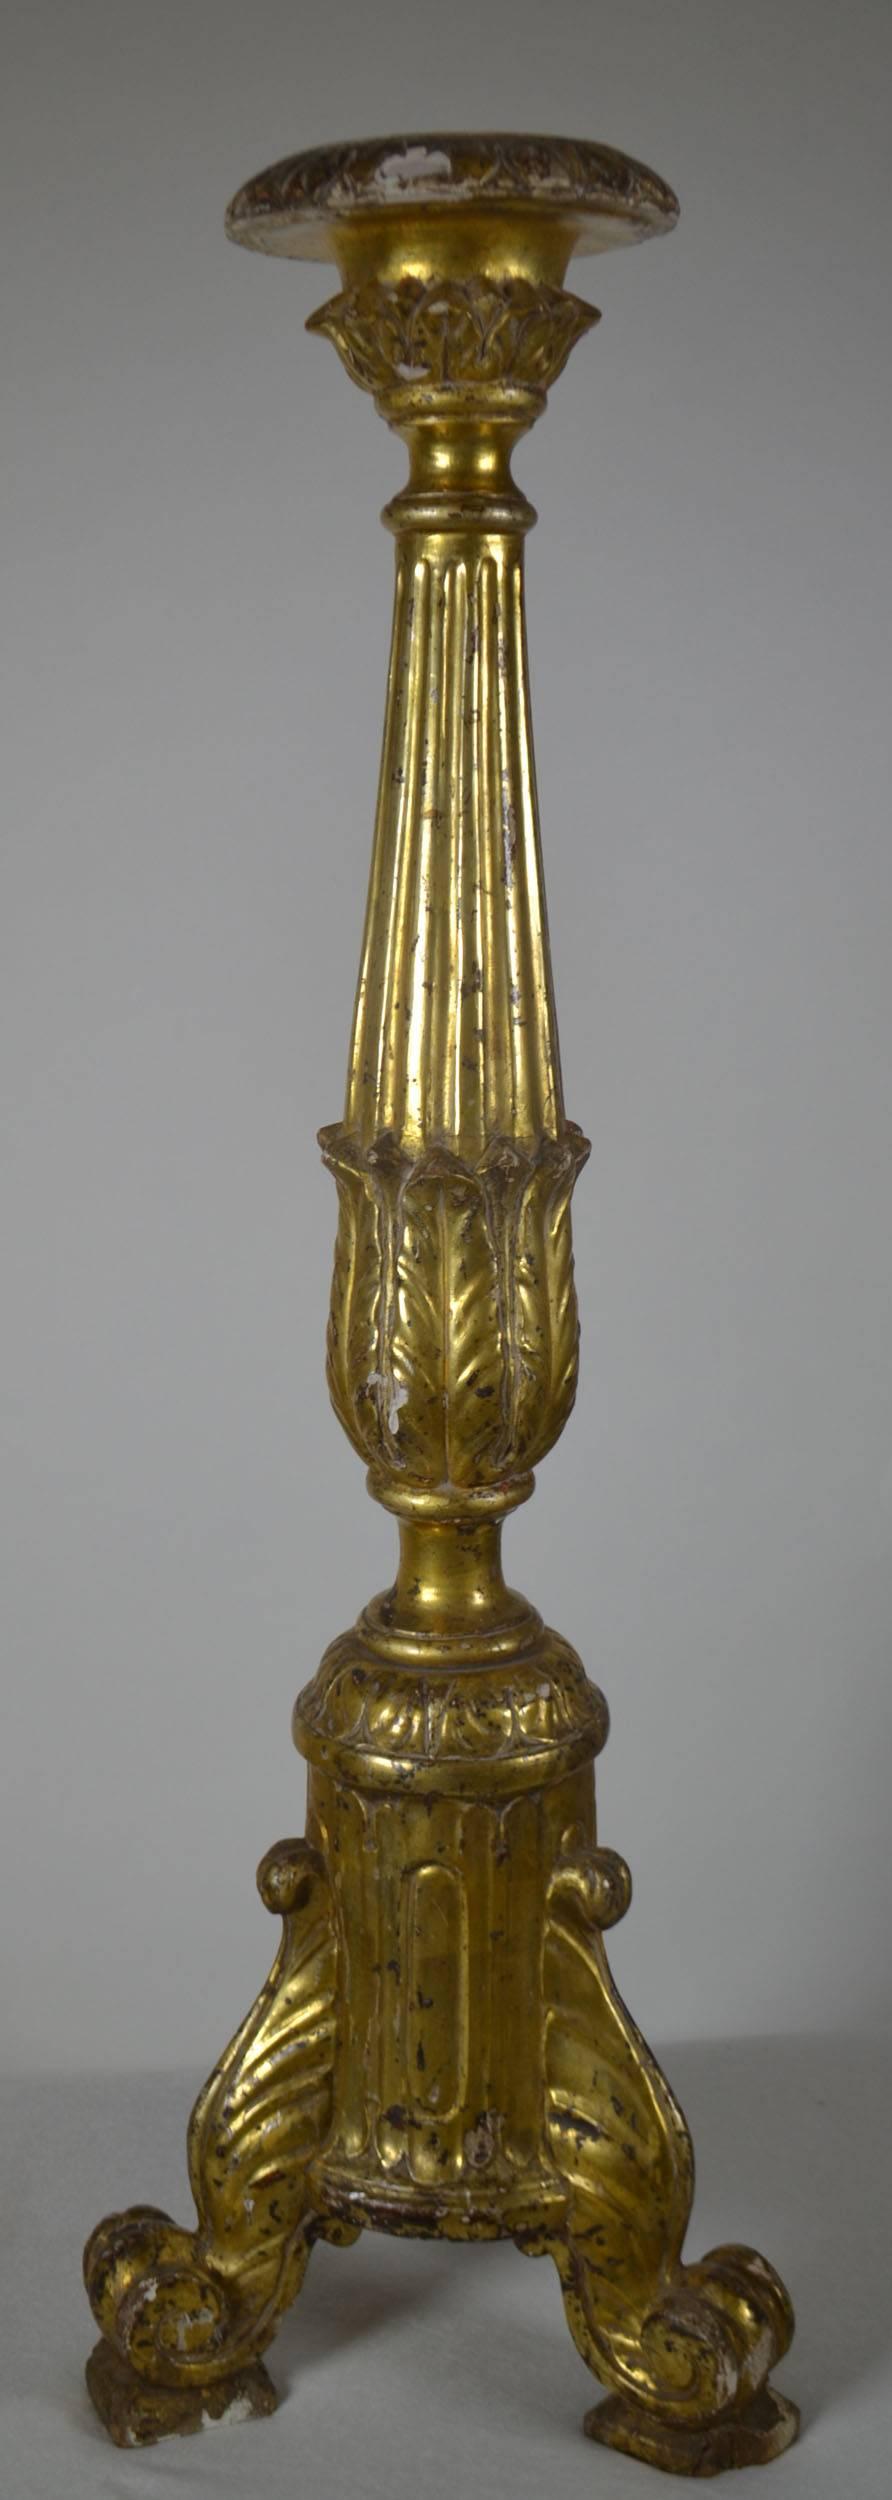 Louis XVI period giltwood candlestick with a fluted column ending in acanthus leaves above scroll feet. Some chipping at the top and bottom of piece.